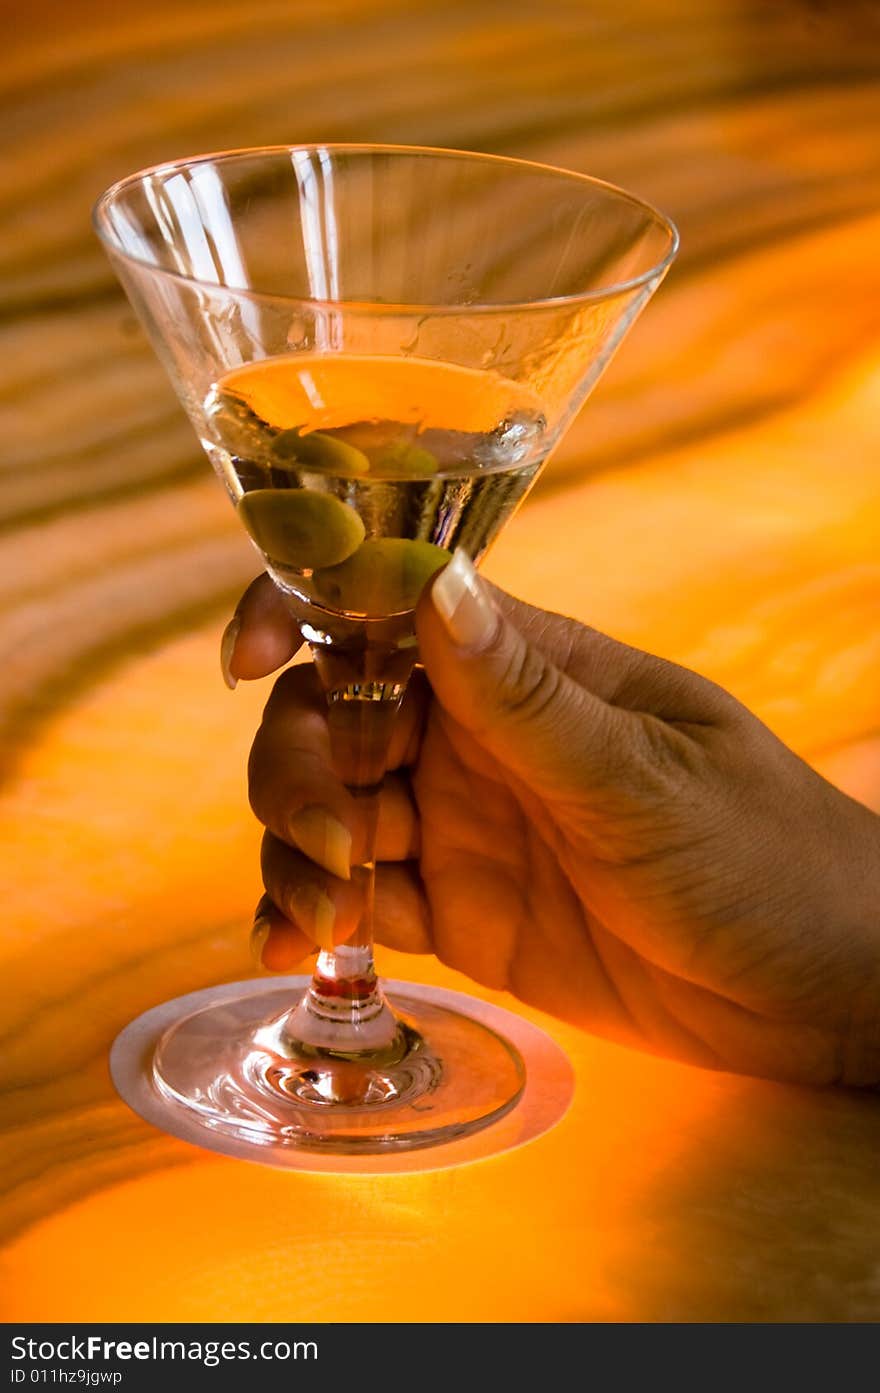 Dirty Martini with green olives, held by a woman's hand on a colorful bar countertop. Dirty Martini with green olives, held by a woman's hand on a colorful bar countertop